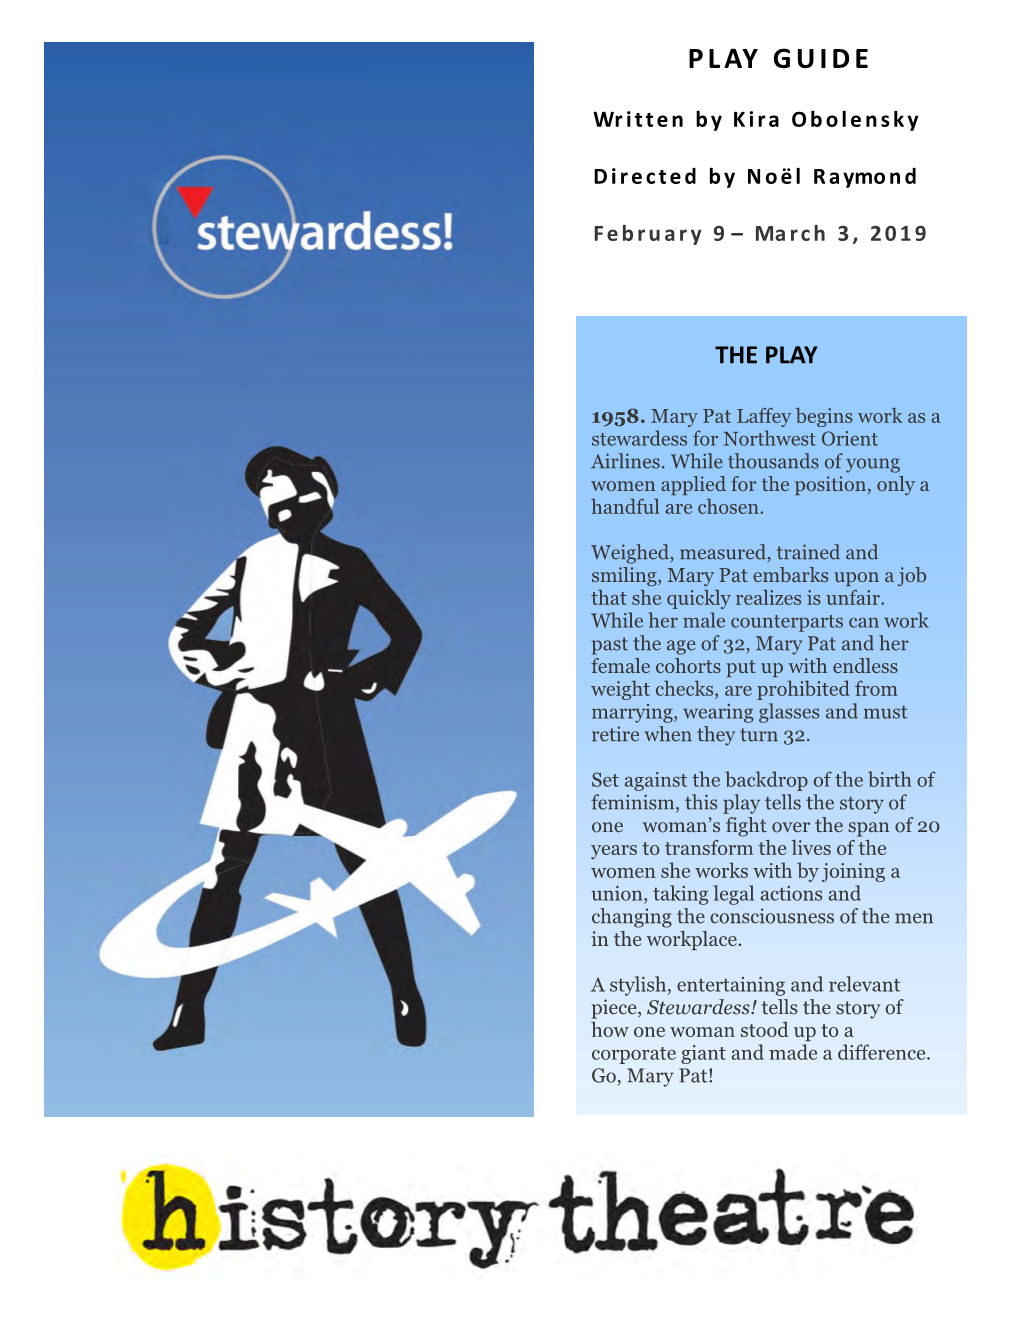 Stewardess! Tells the Story of How One Woman Stood up to a Corporate Giant and Made a Difference